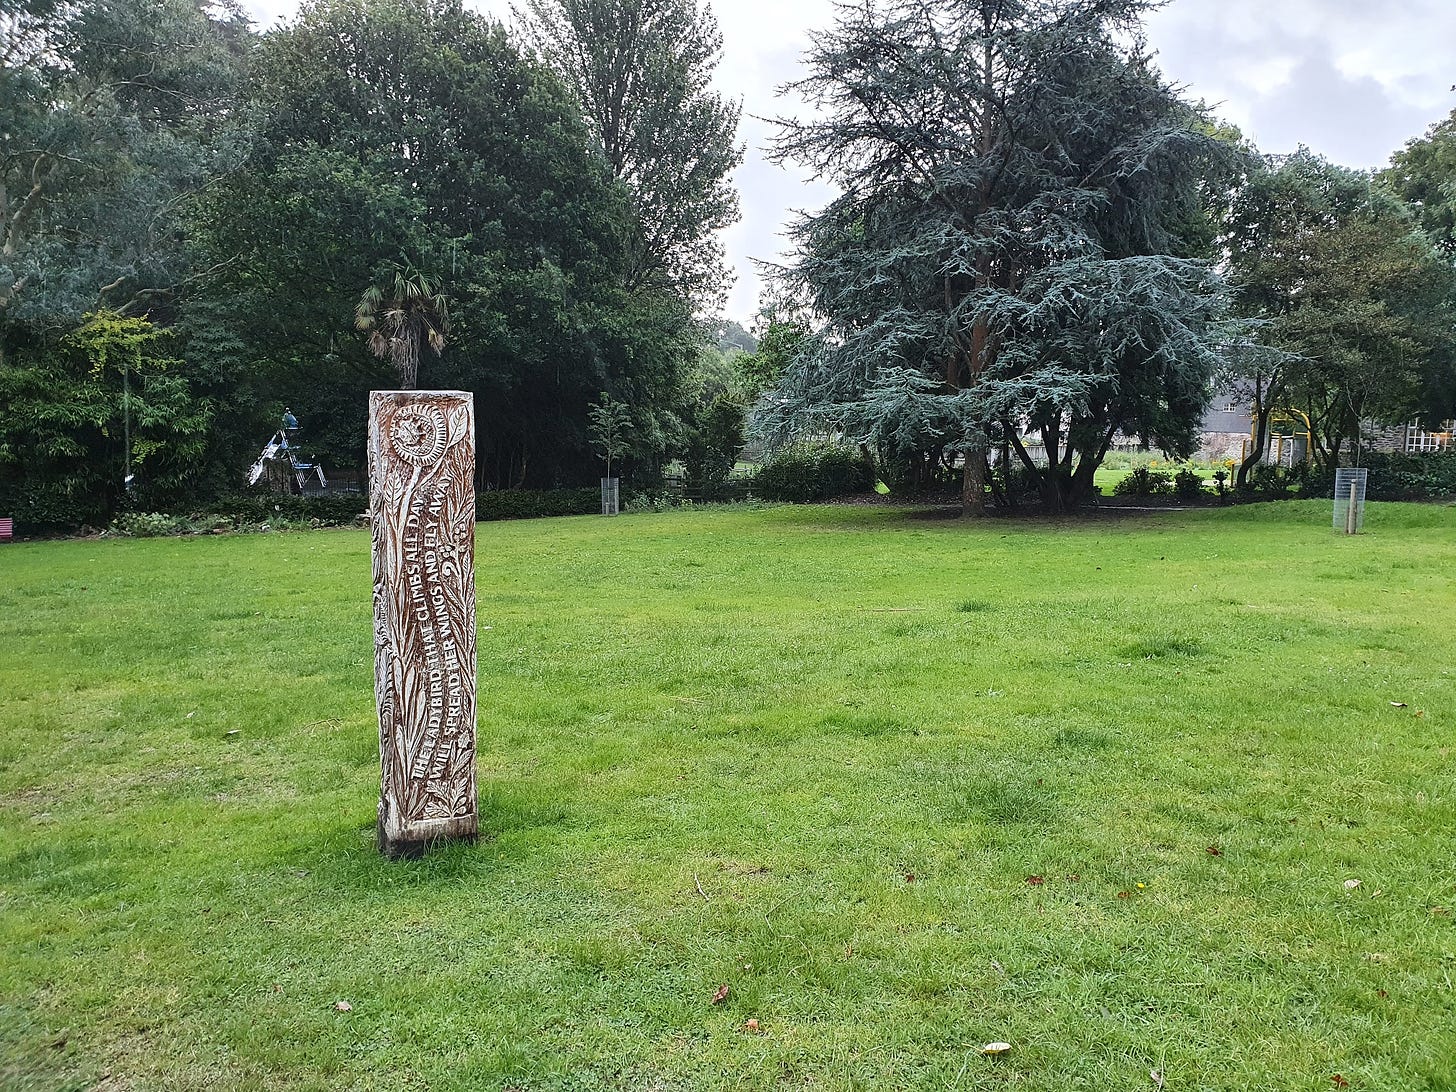 The ‘ladybird sculpture’ in Trelawney Park, Penryn, Cornwall: a four-sided carved wooden pillar with plant, insect and bird motifs